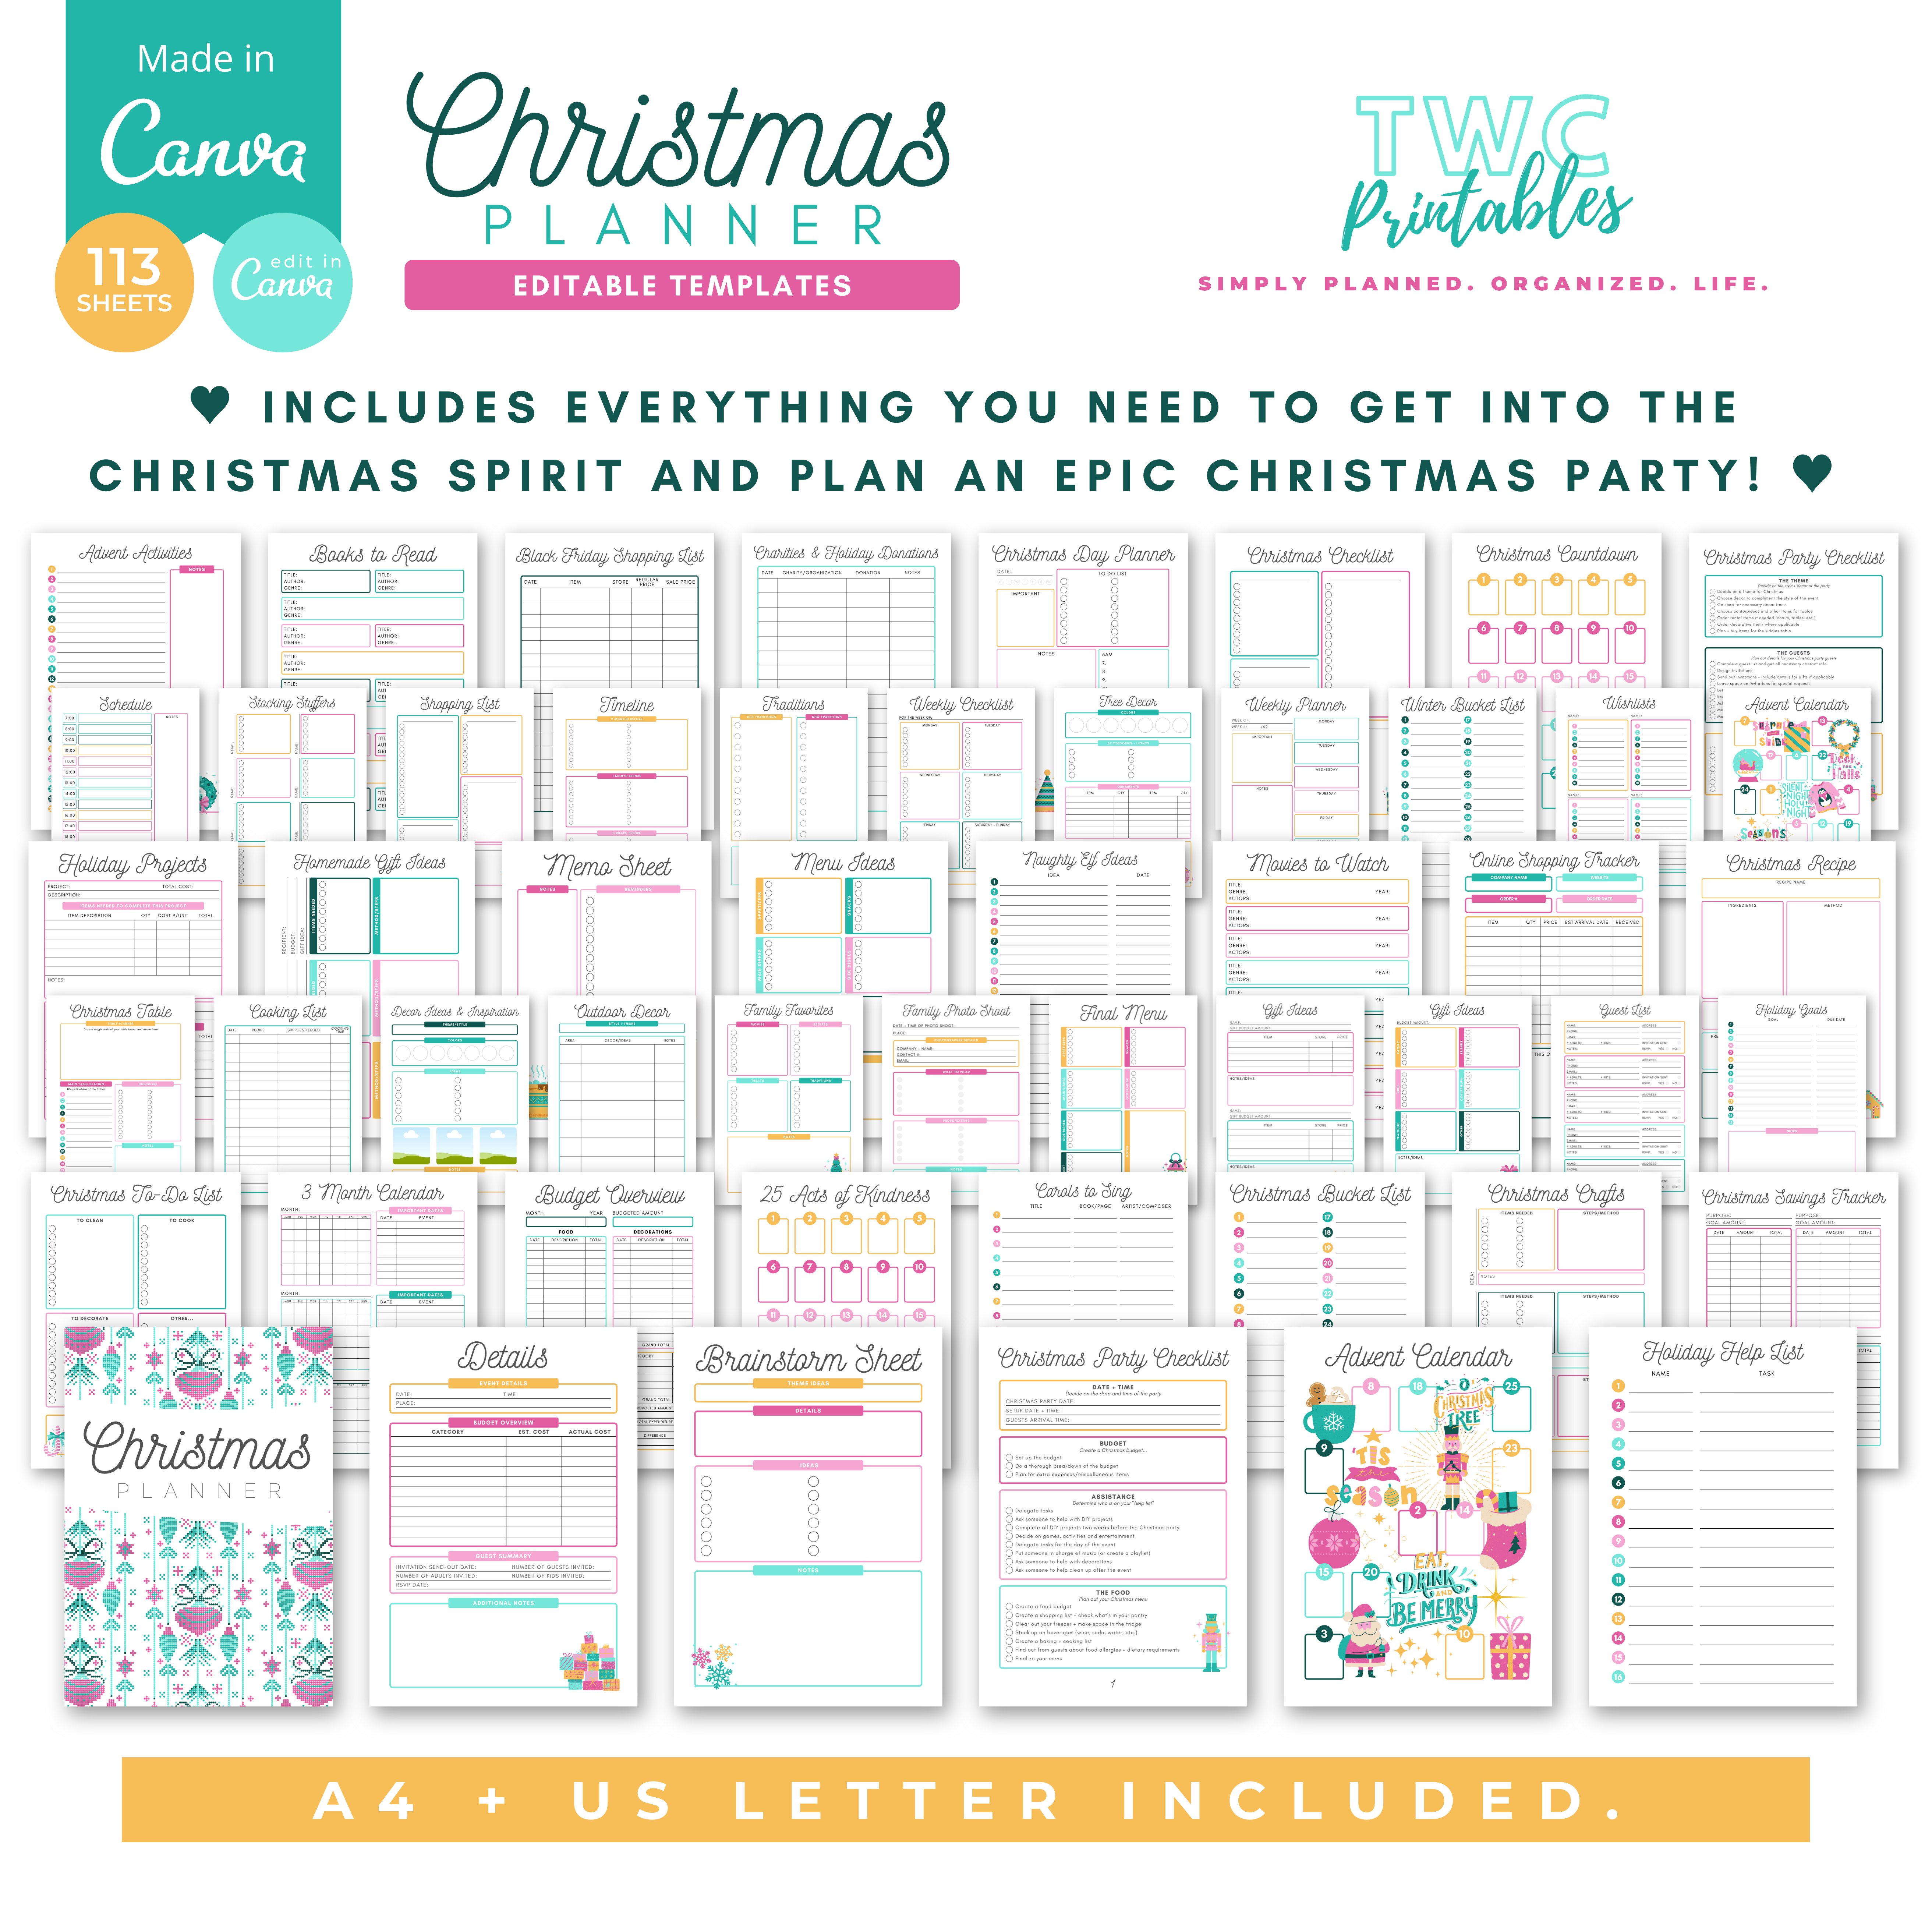 This ultimate Christmas Planner is an editable Canva Template that you can change to suit your needs! Create your very own holiday planner by simply editing this template with the free version of Canva - you can change the entire design, including fonts, colors, elements, and much more! A free Canva guide for beginners is included in your purchase of this listing. The Christmas Planner template can be used for 2021 and beyond (the calendars are undated).